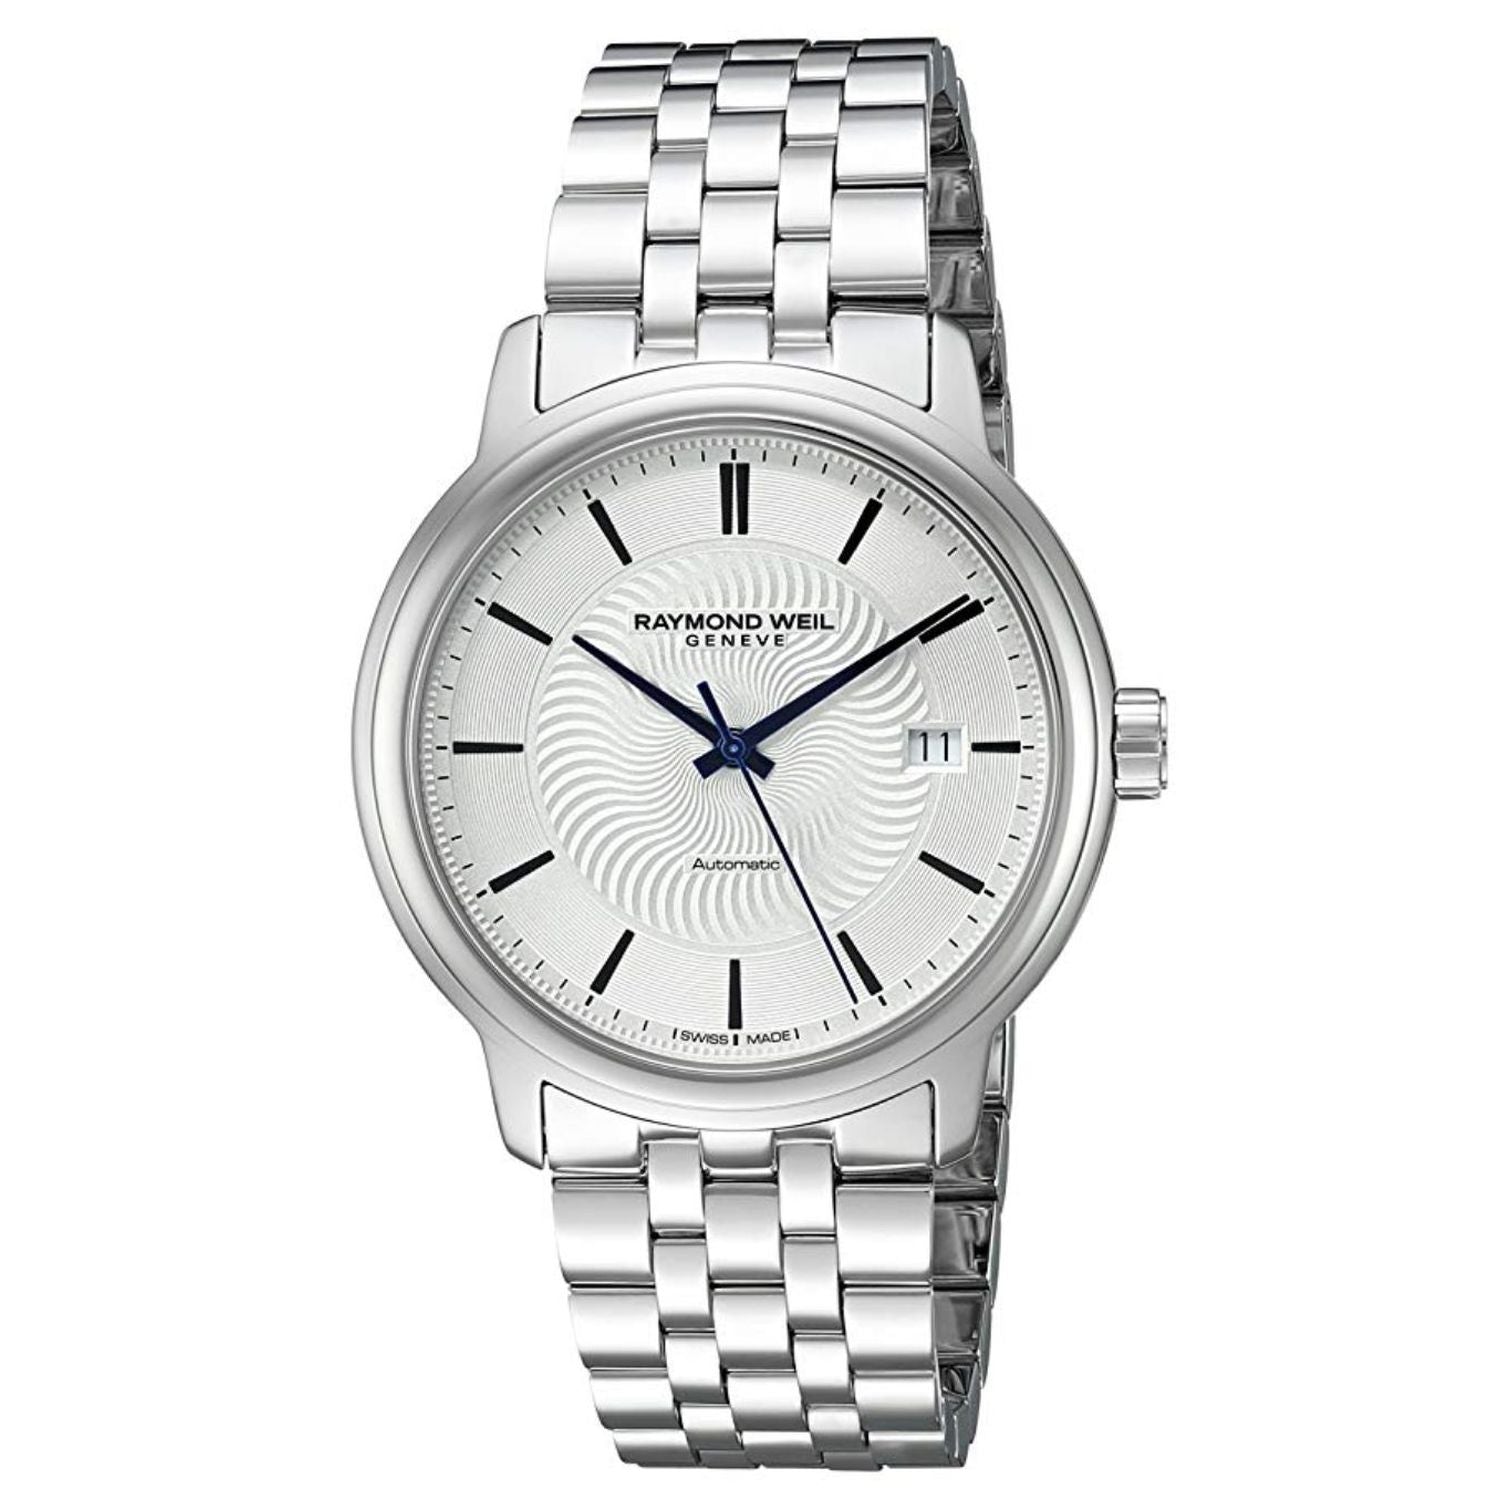 Raymond Weil Men's Automatic Movement Silver Dial Watch - RW-0007